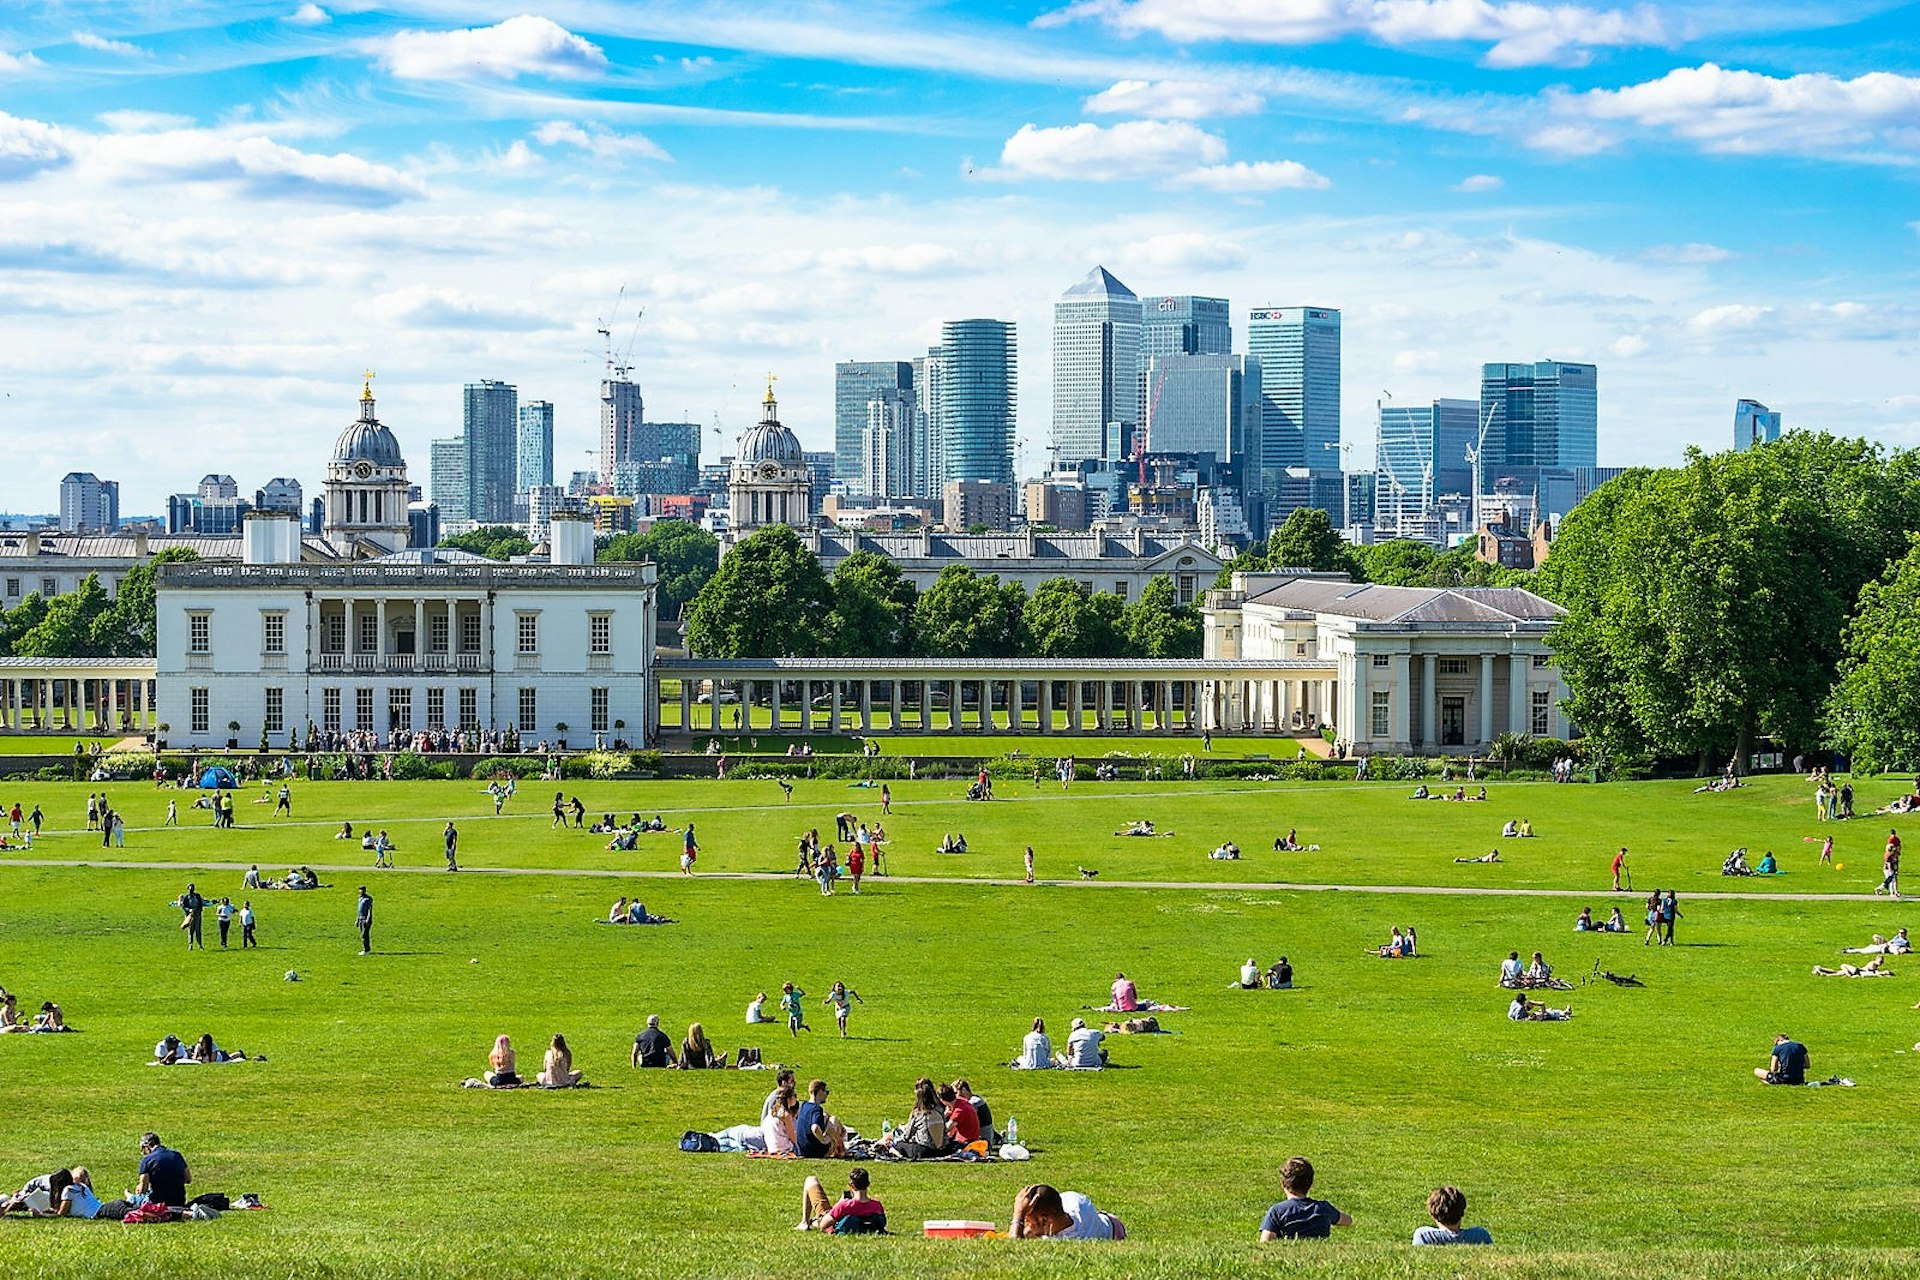 View of Greenwich Park and Docklands from the park's main hill.